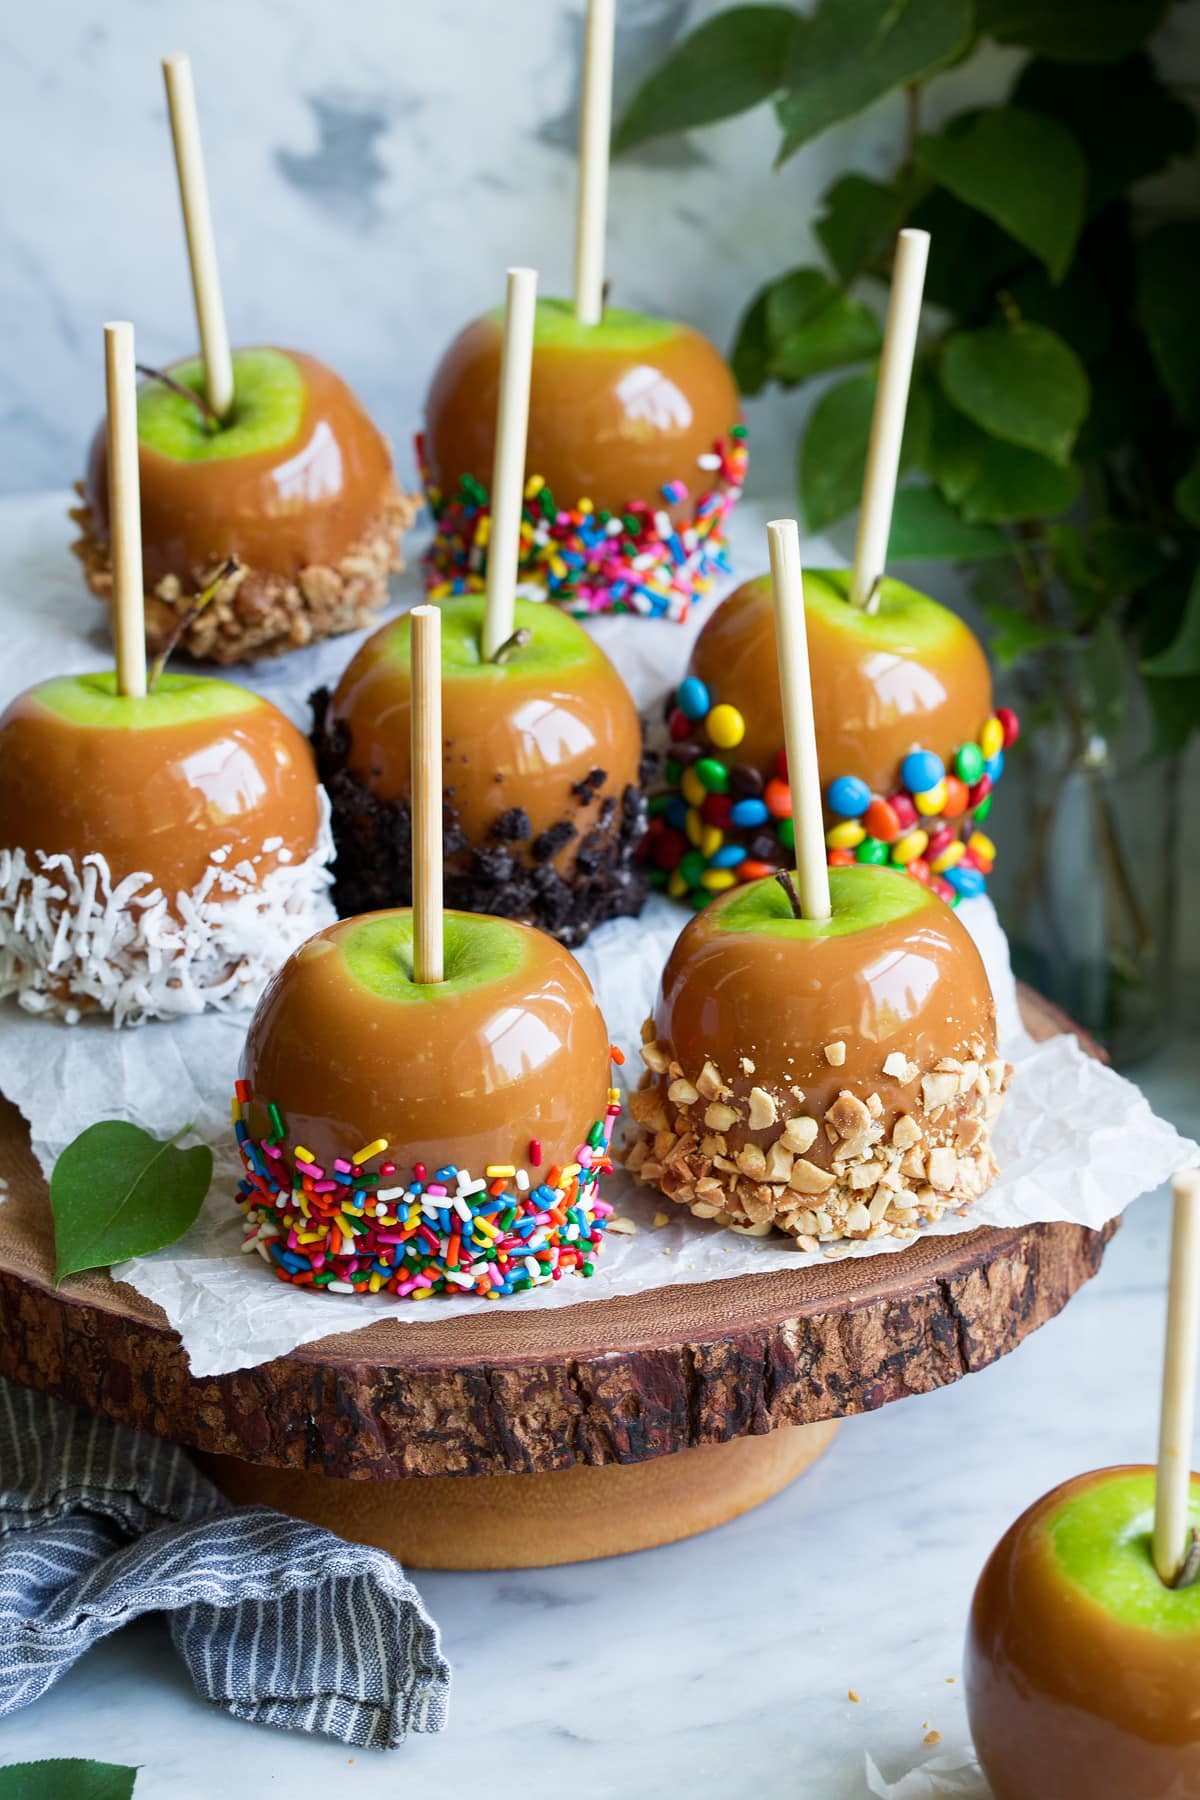 Caramel apples on a wooden cake stand. Apples are coated with various toppings.